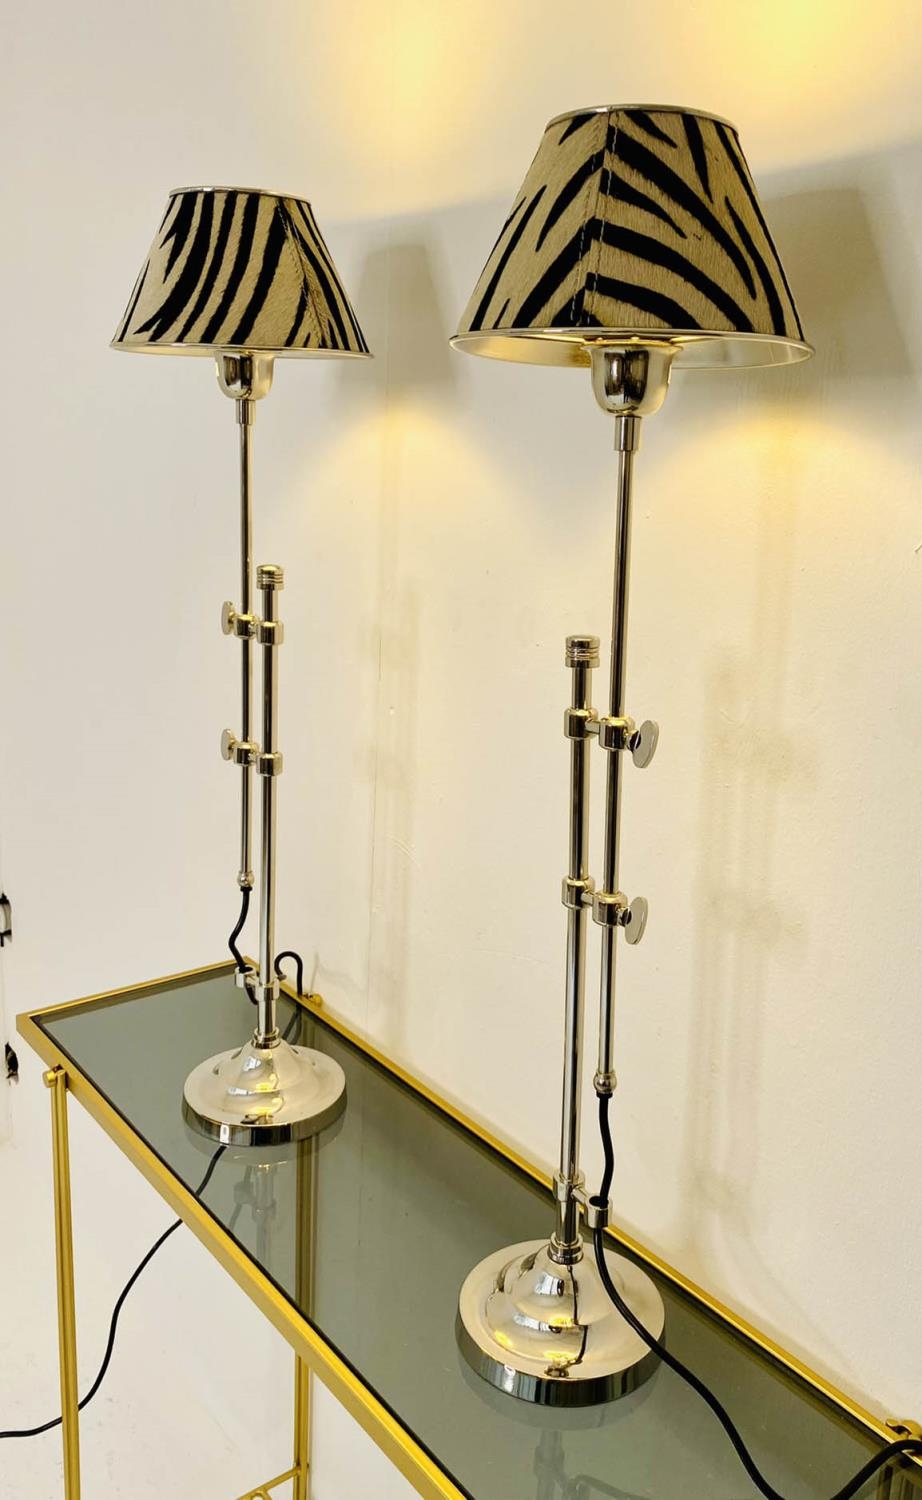 LIBRARY TABLE LAMPS, a pair, height adjustable, faux zebra hide shades, 68cm x 20cm x 20cm. - Image 4 of 4